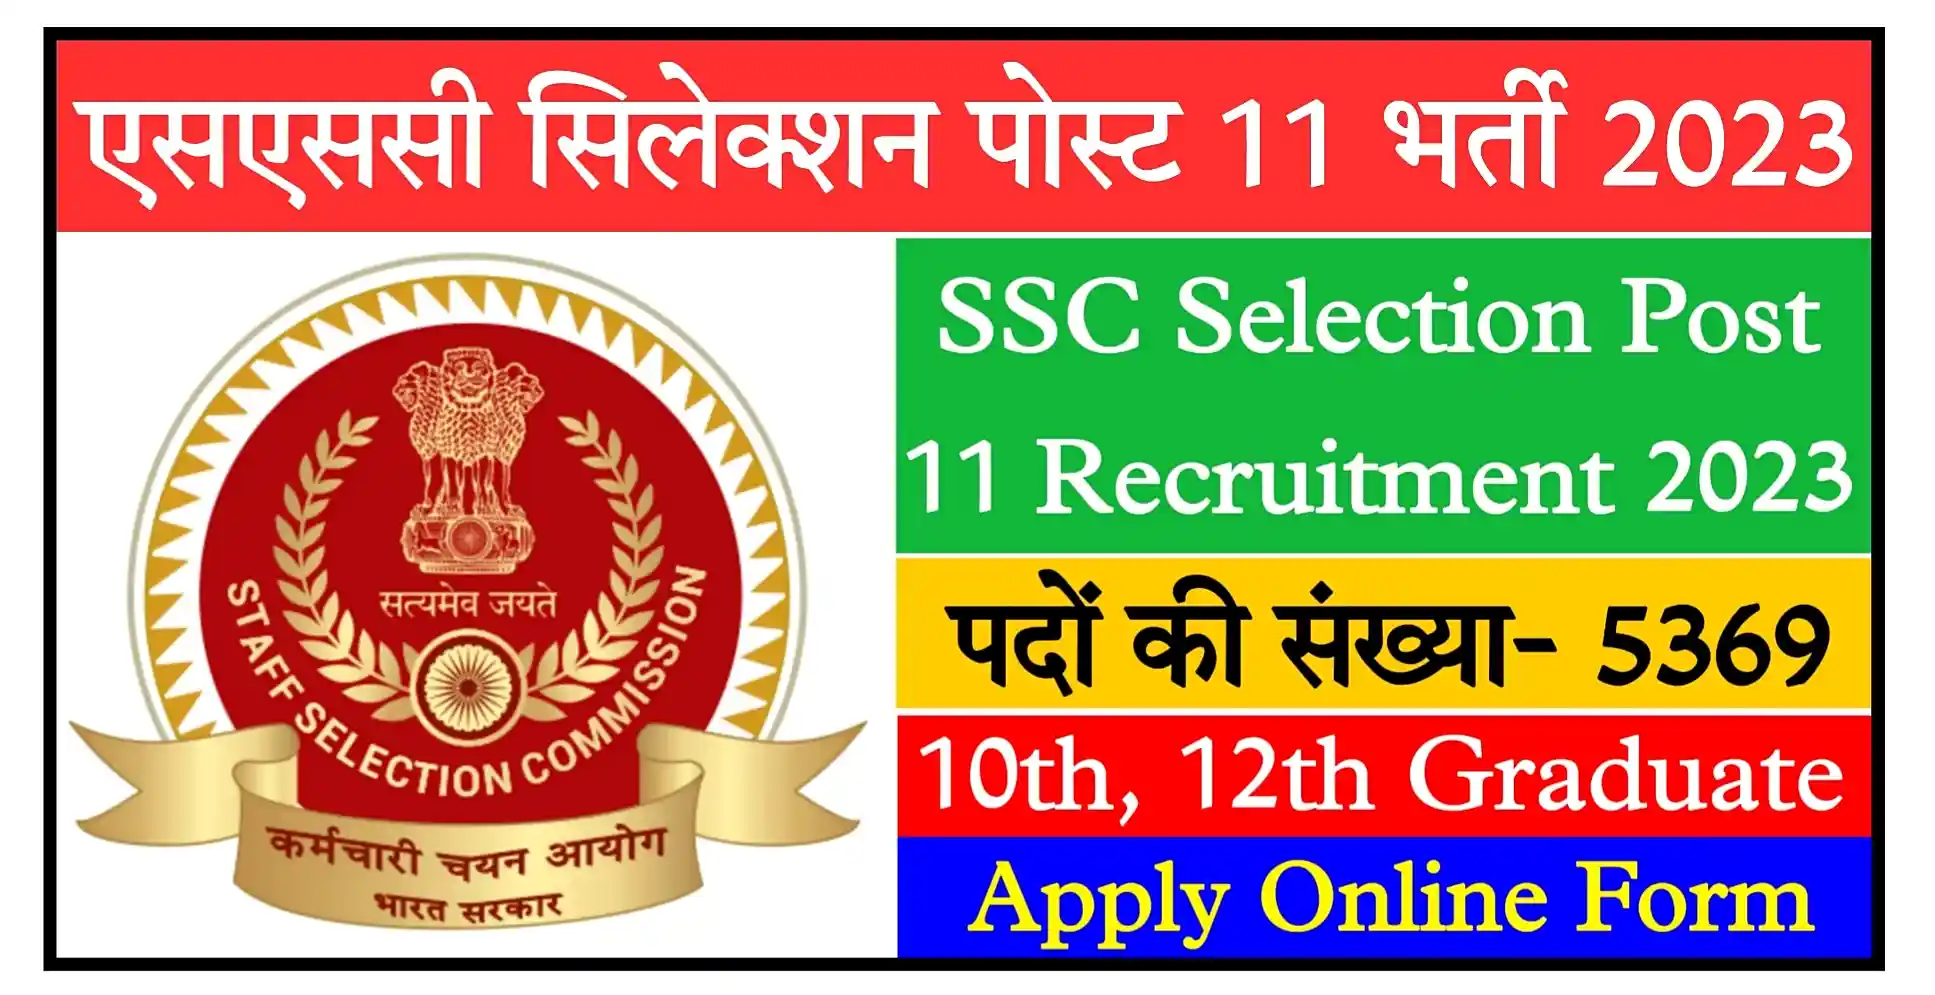 SSC Selection Post 11 Recruitment 2023 Notification, Apply Online For 5369 Posts, Qualification 10th, 12th, Graduate Pass